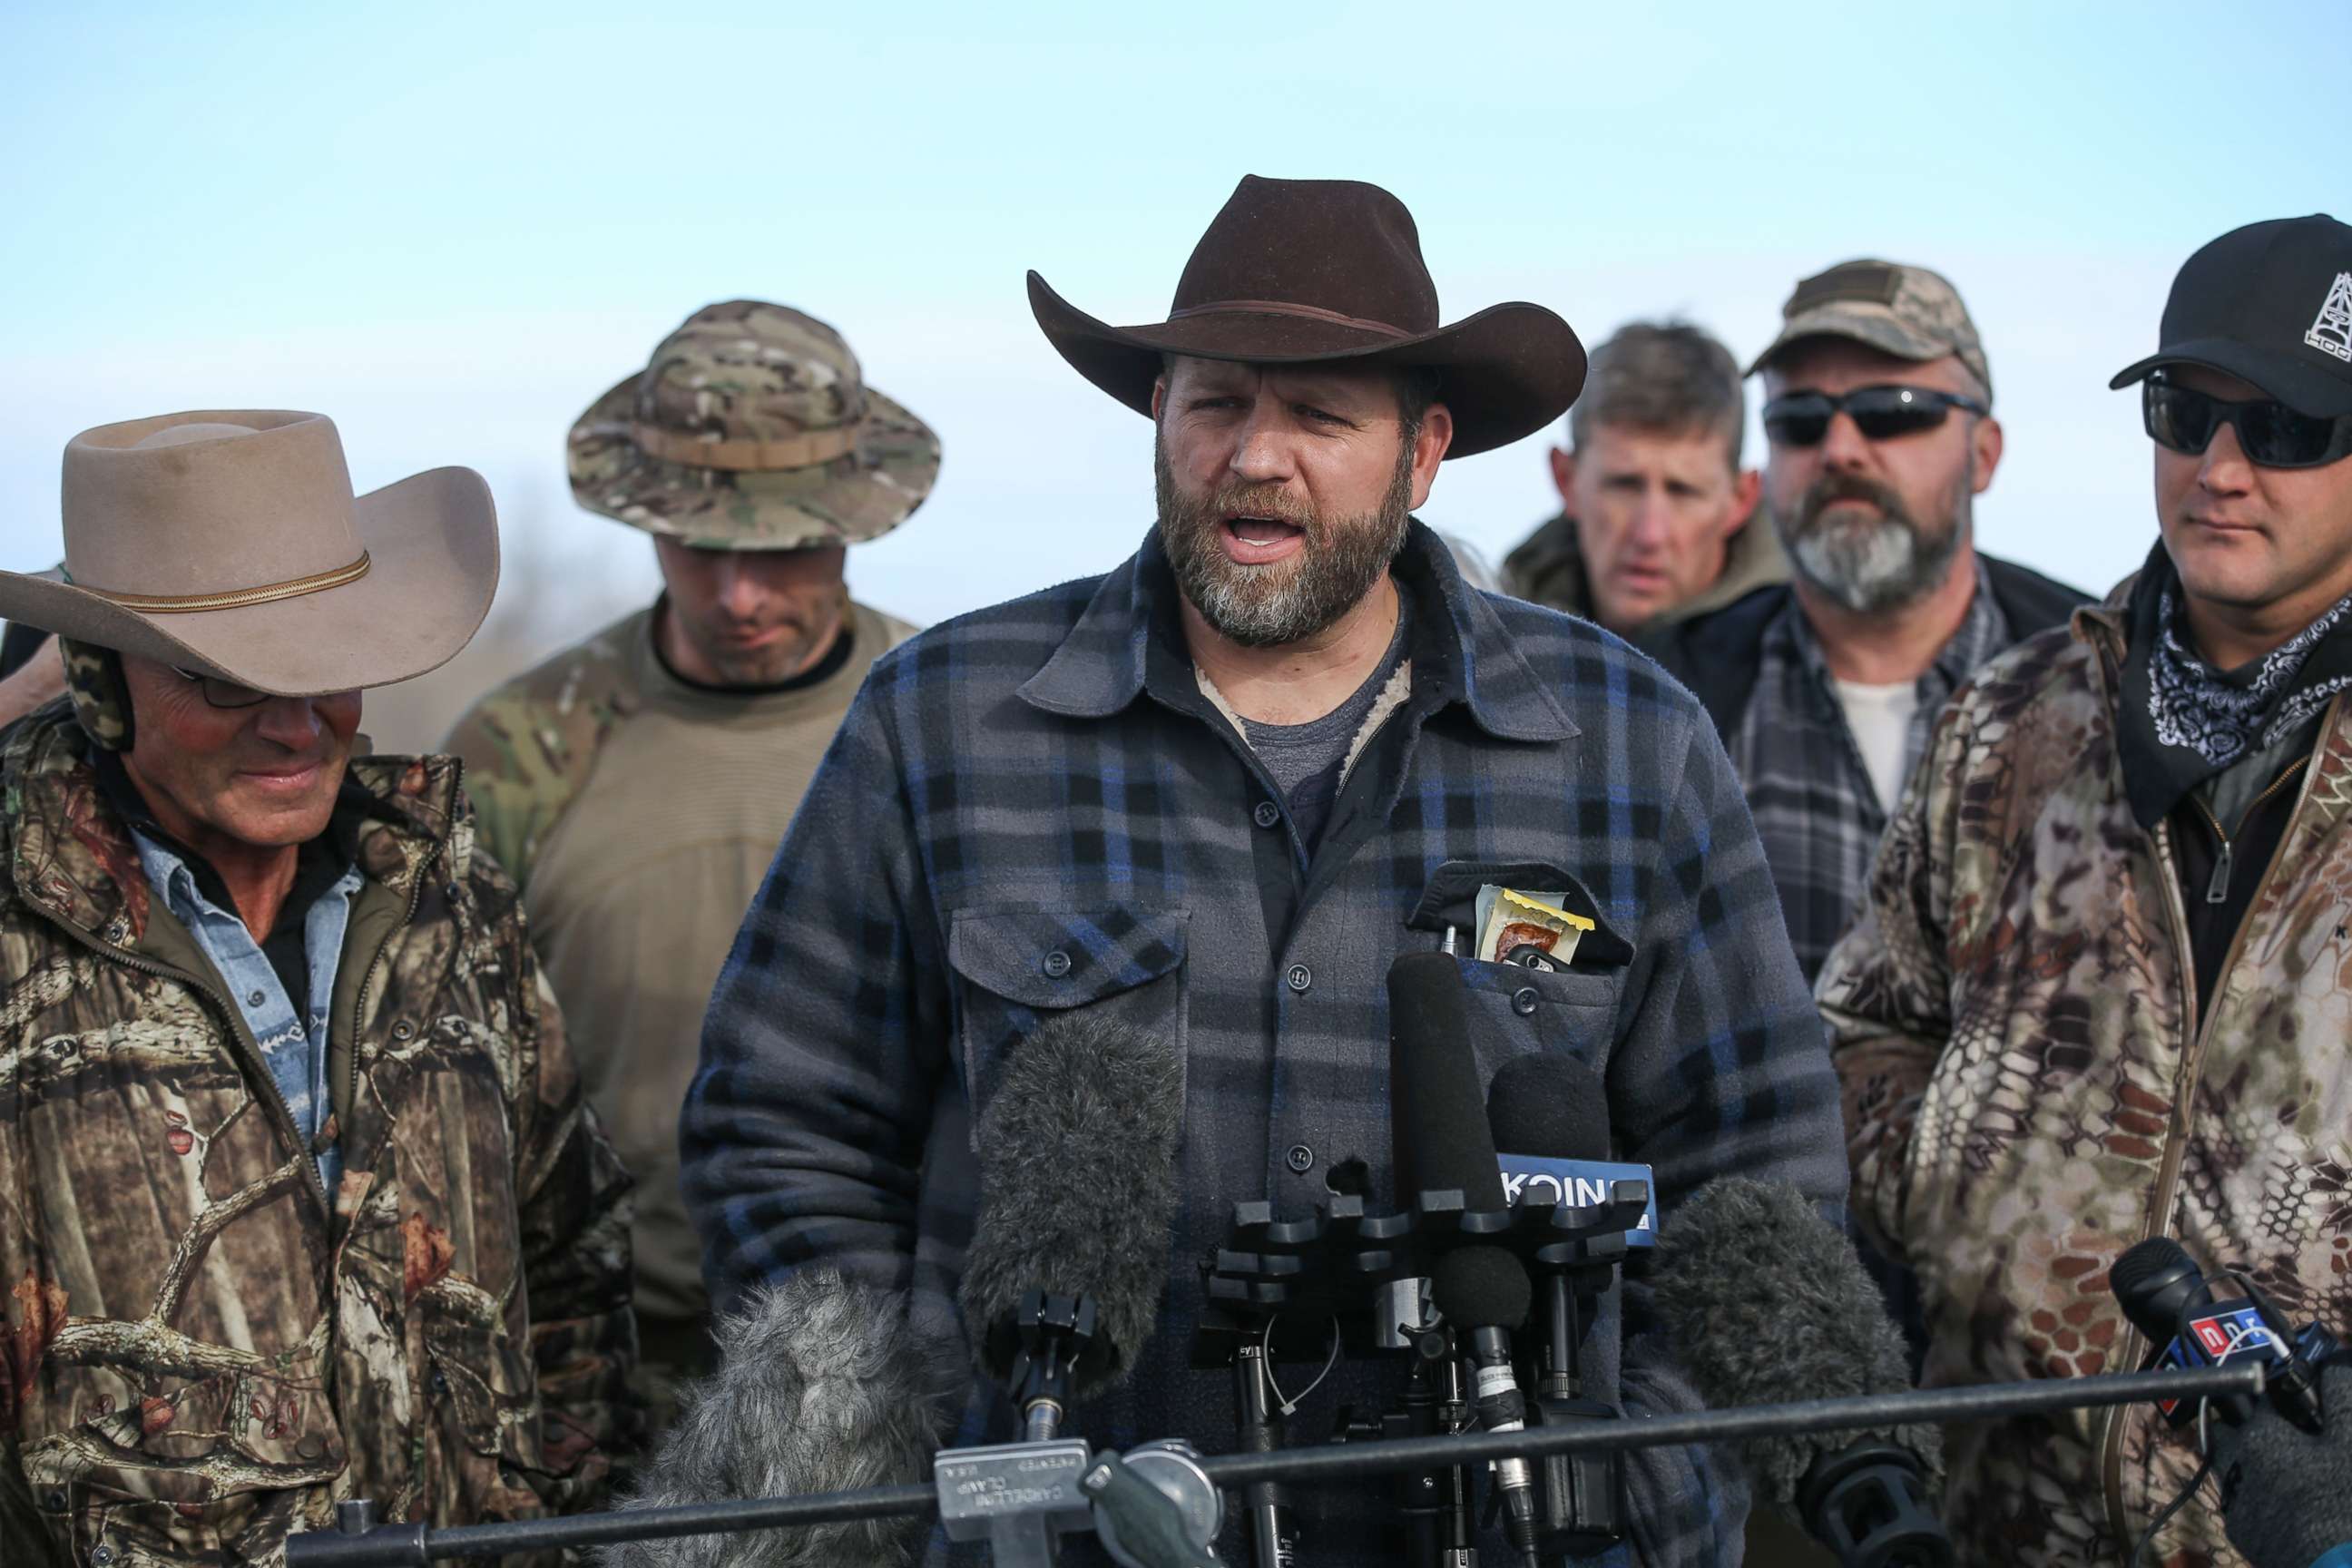 PHOTO: Ammon Bundy, the leader of an anti-government militia, speaks to members of the media in front of the Malheur National Wildlife Refuge Headquarters on January 6, 2016, near Burns, Oregon.